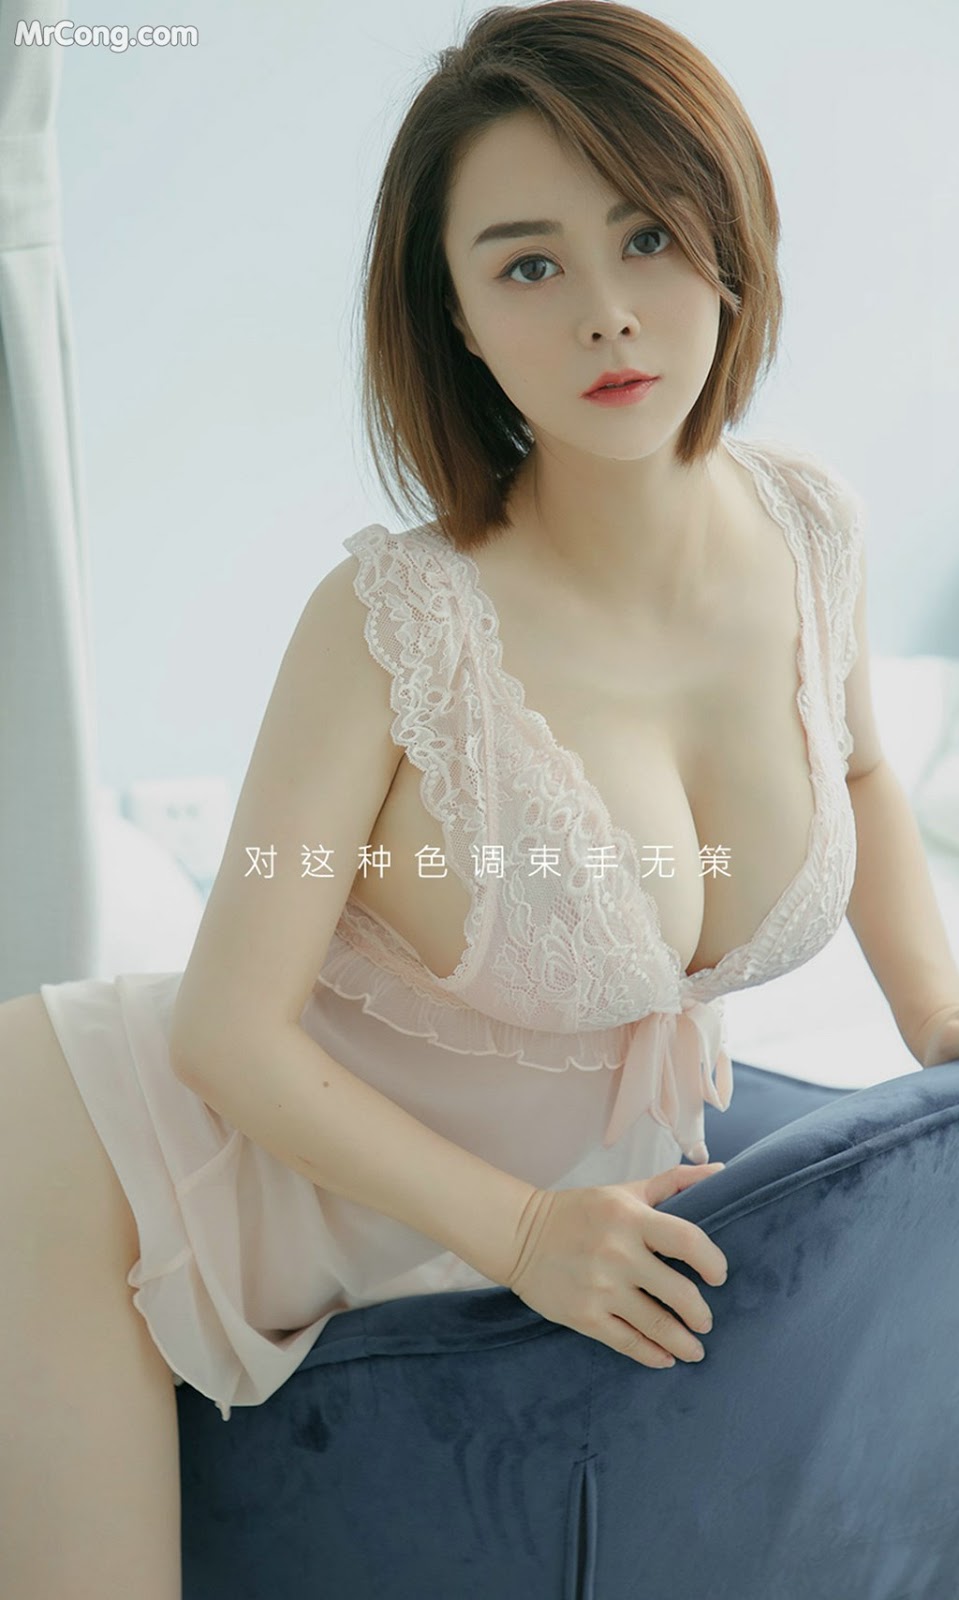 UGIRLS - Ai You Wu App No.1500: 心仪 (35 pictures)